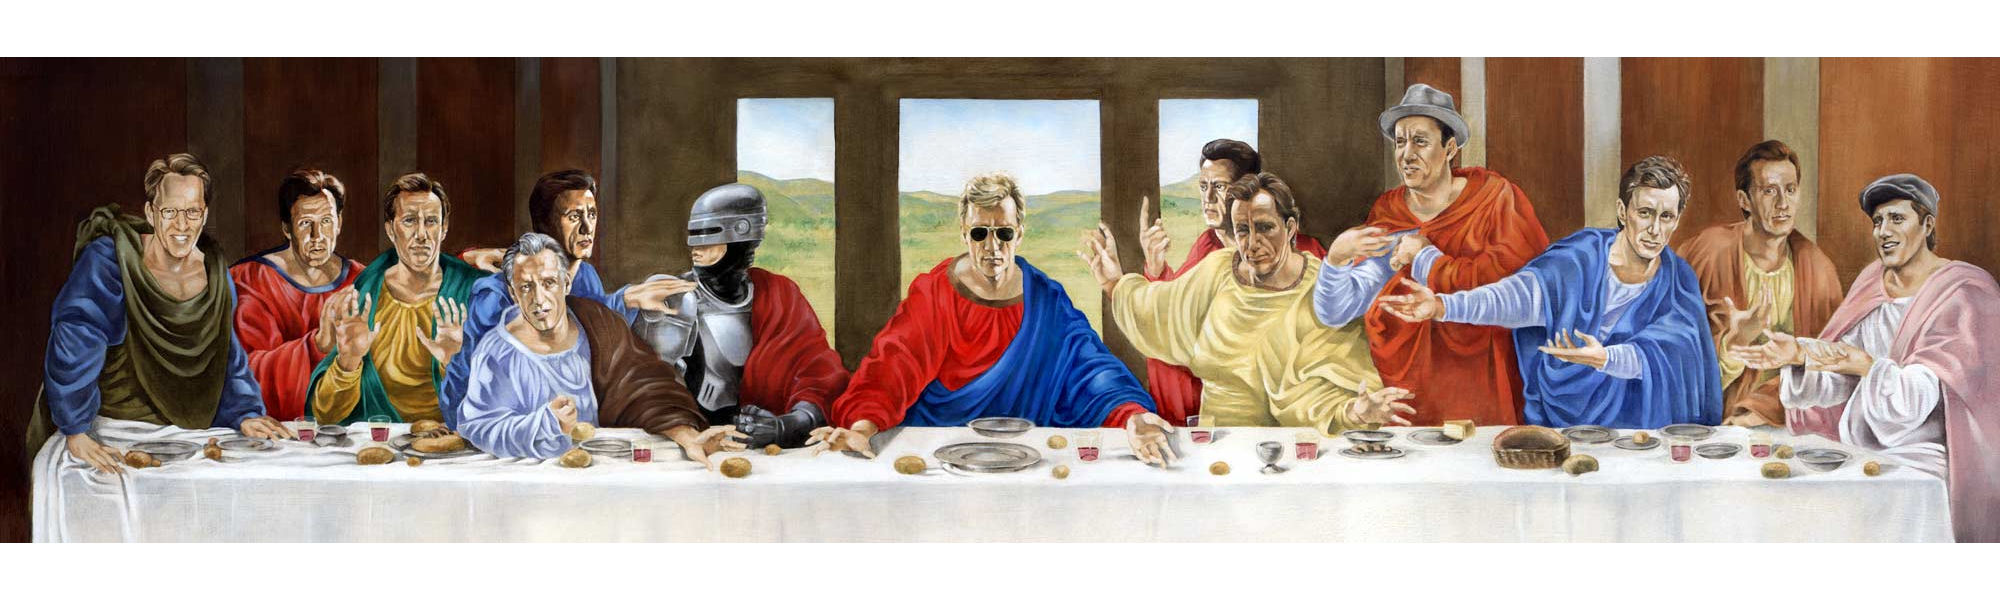 misc, unknown, the last supper download HD wallpaper